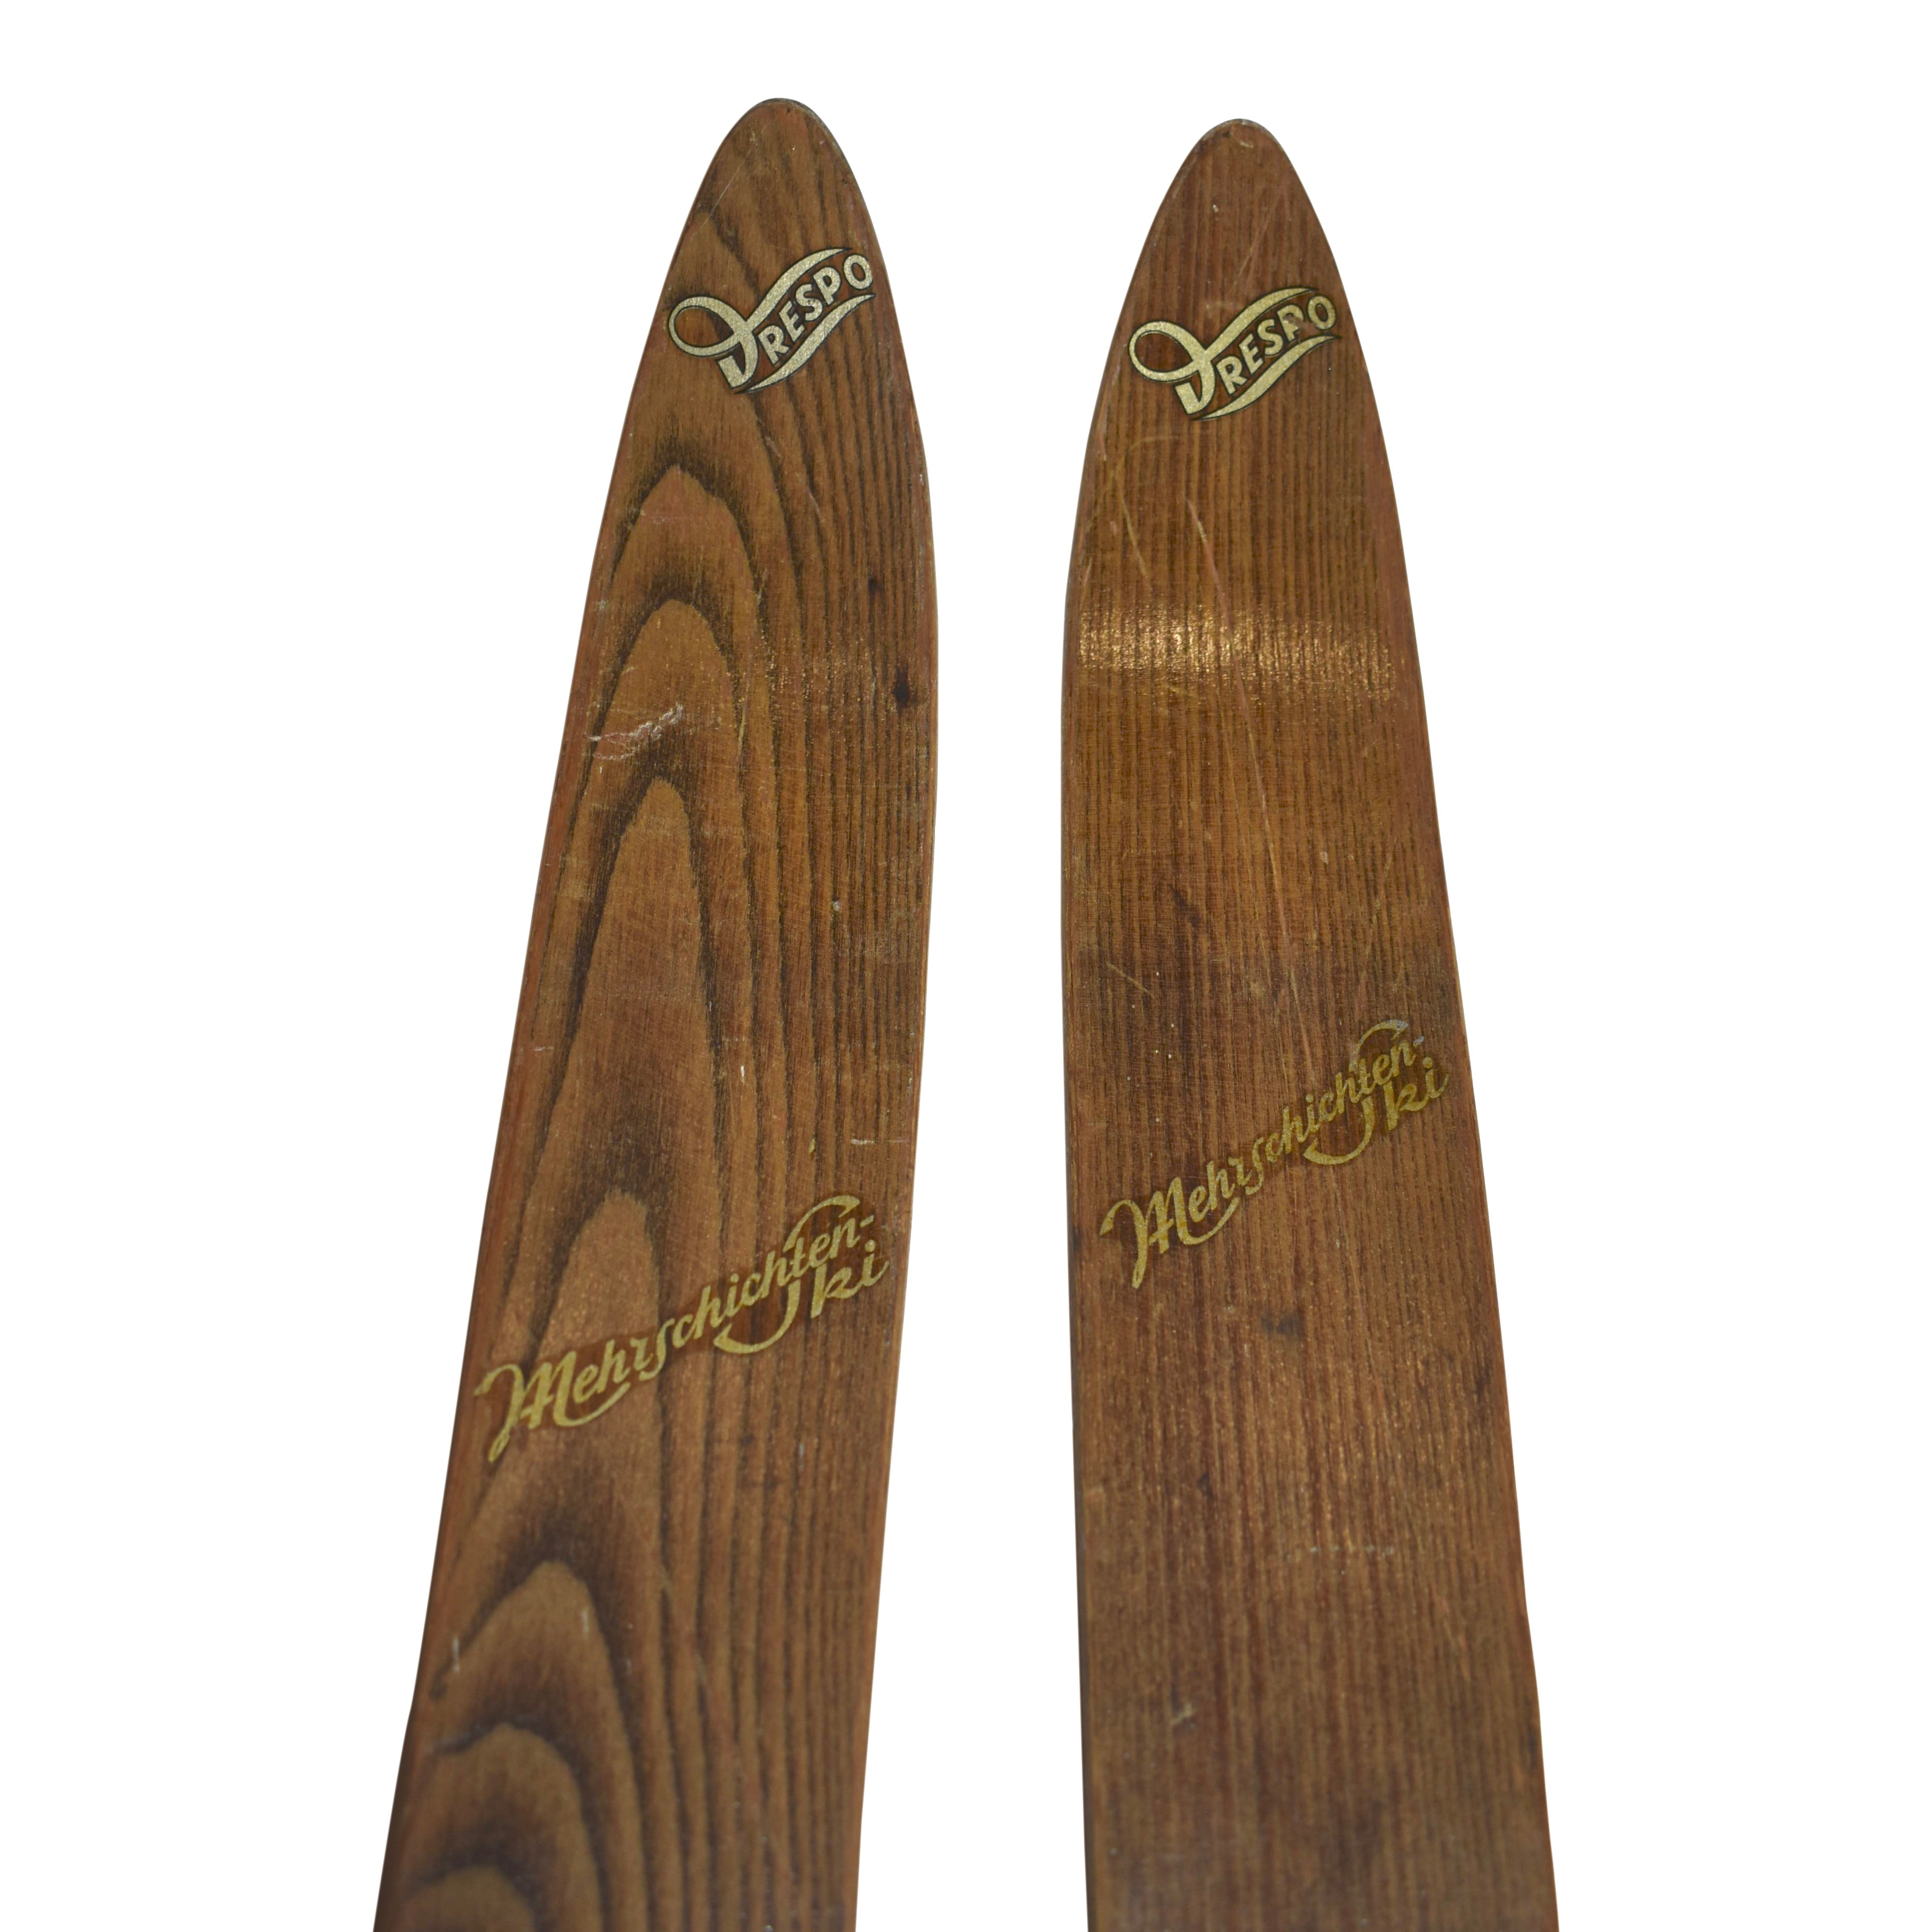 German Drespo Skis with Inselberg Cable Bindings